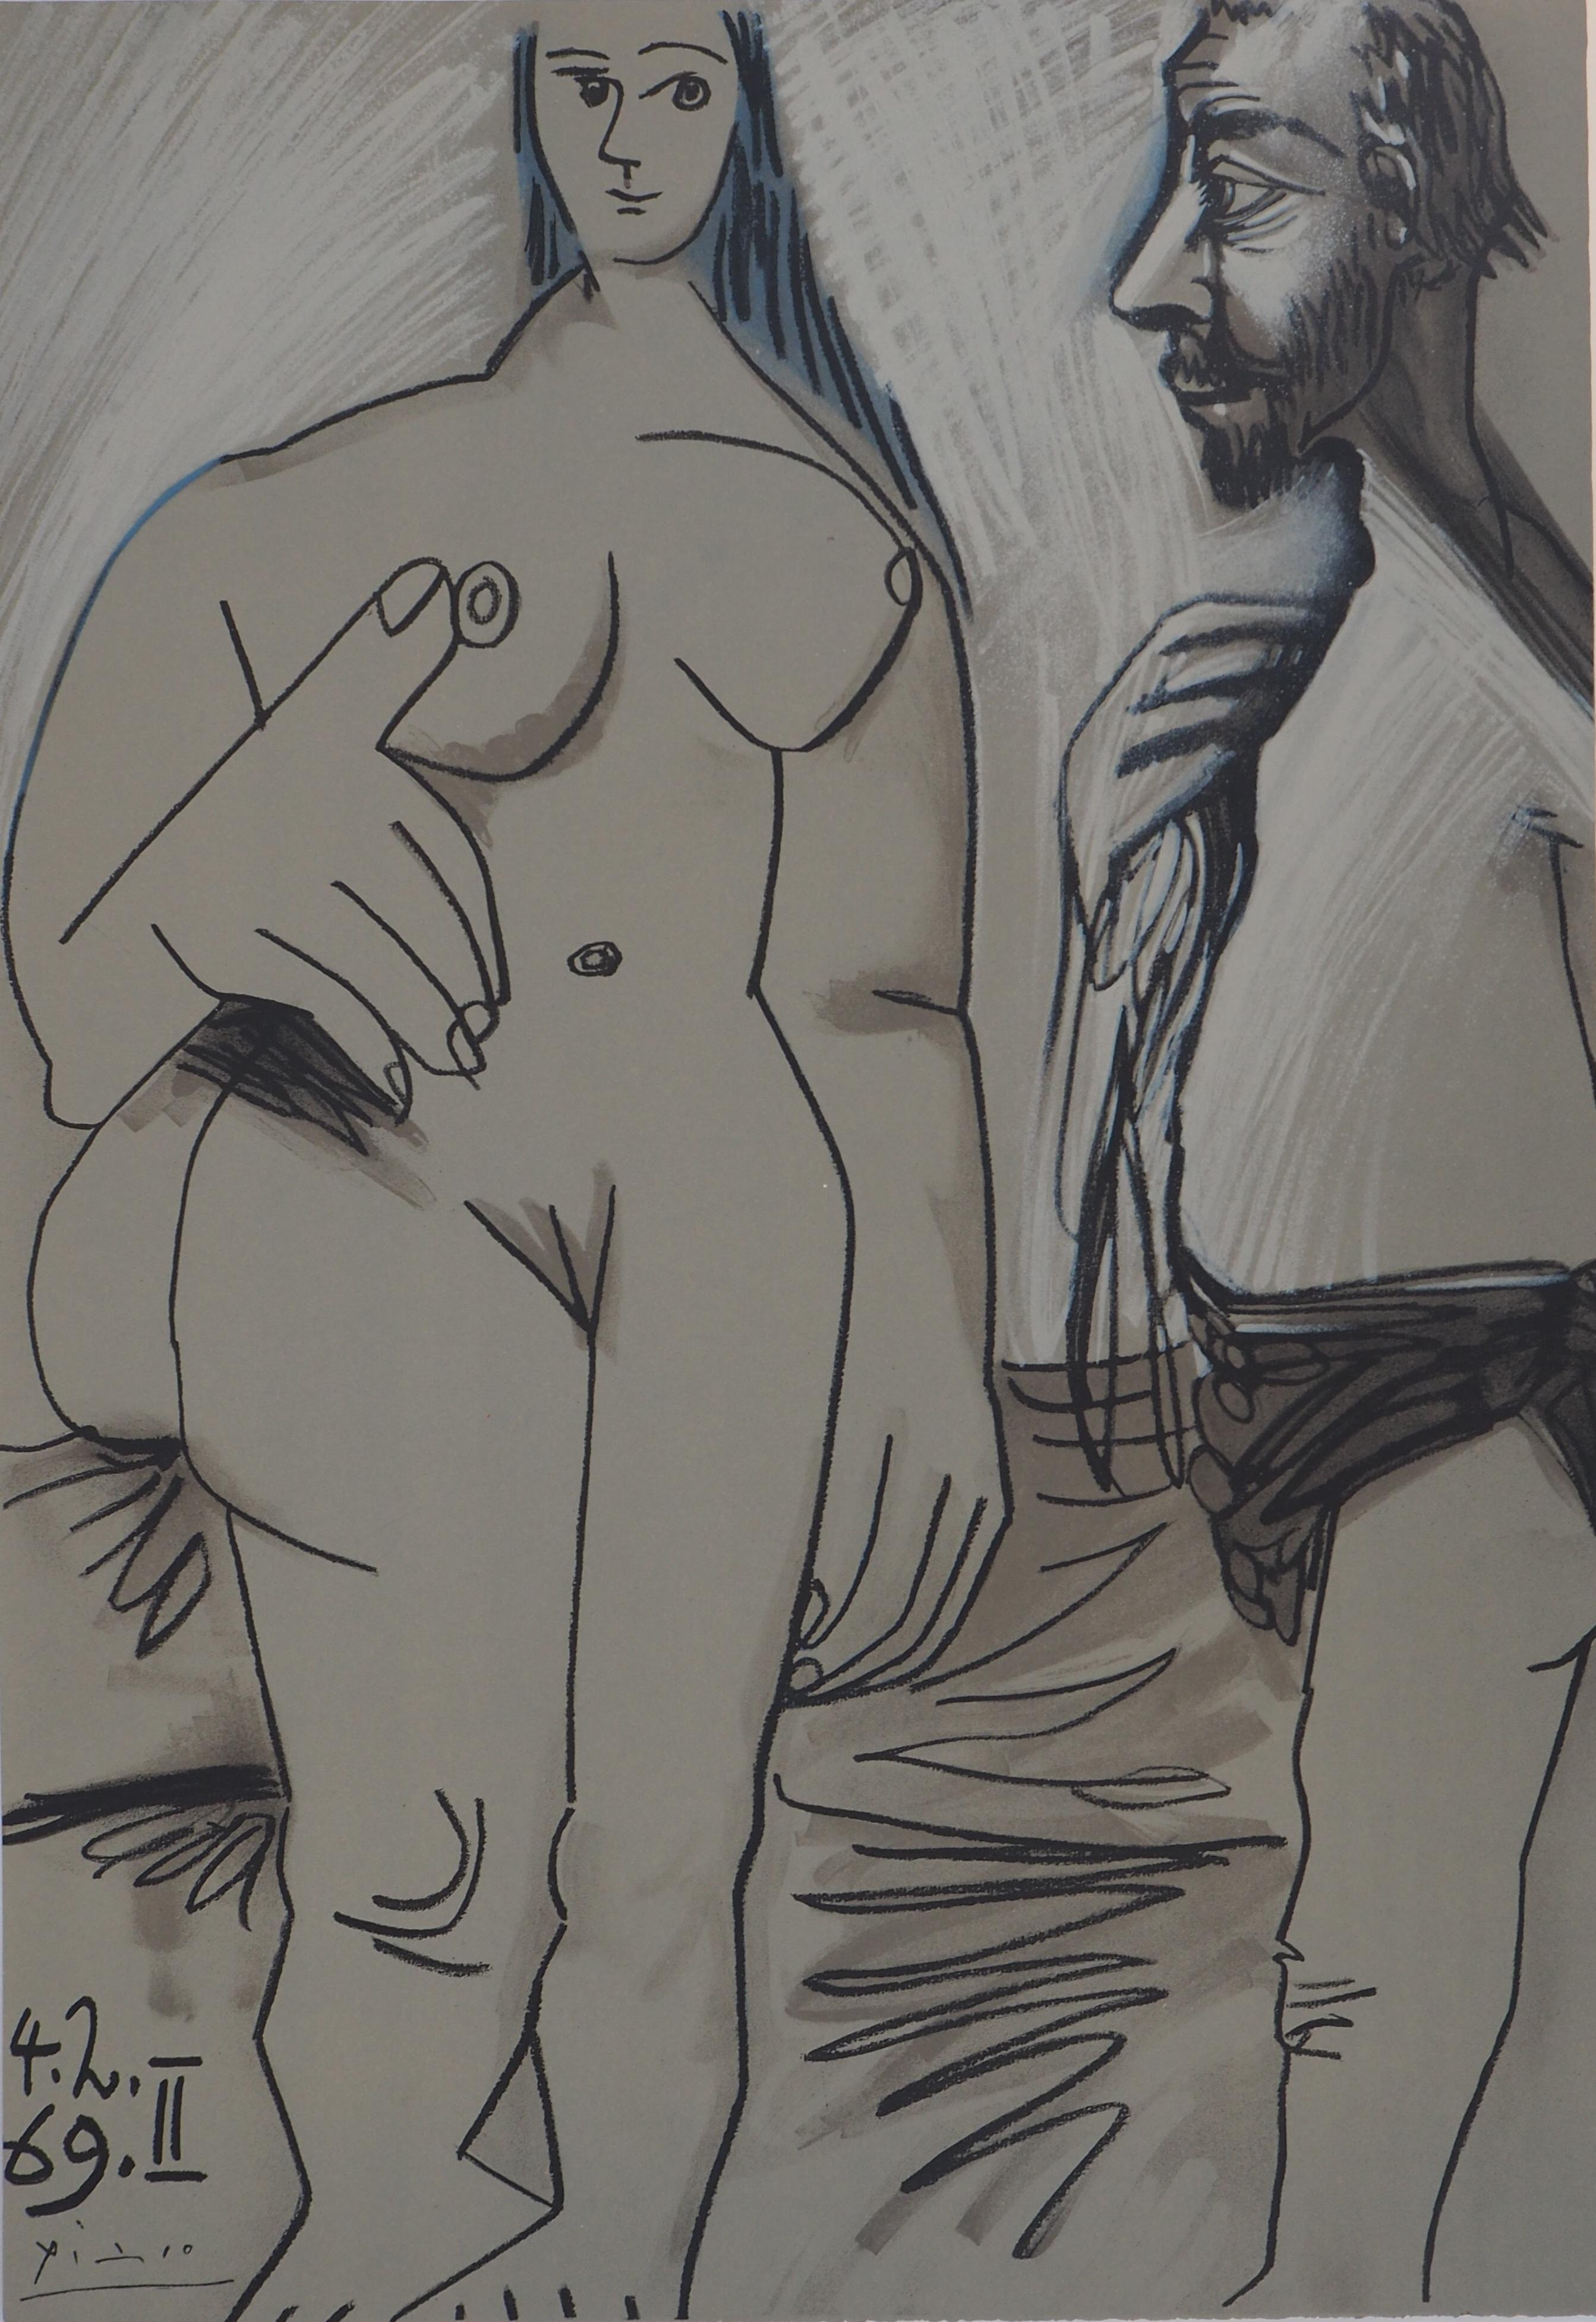 Model and Painter - Lithograph (Mourlot 1971) - Cubist Print by (after) Pablo Picasso